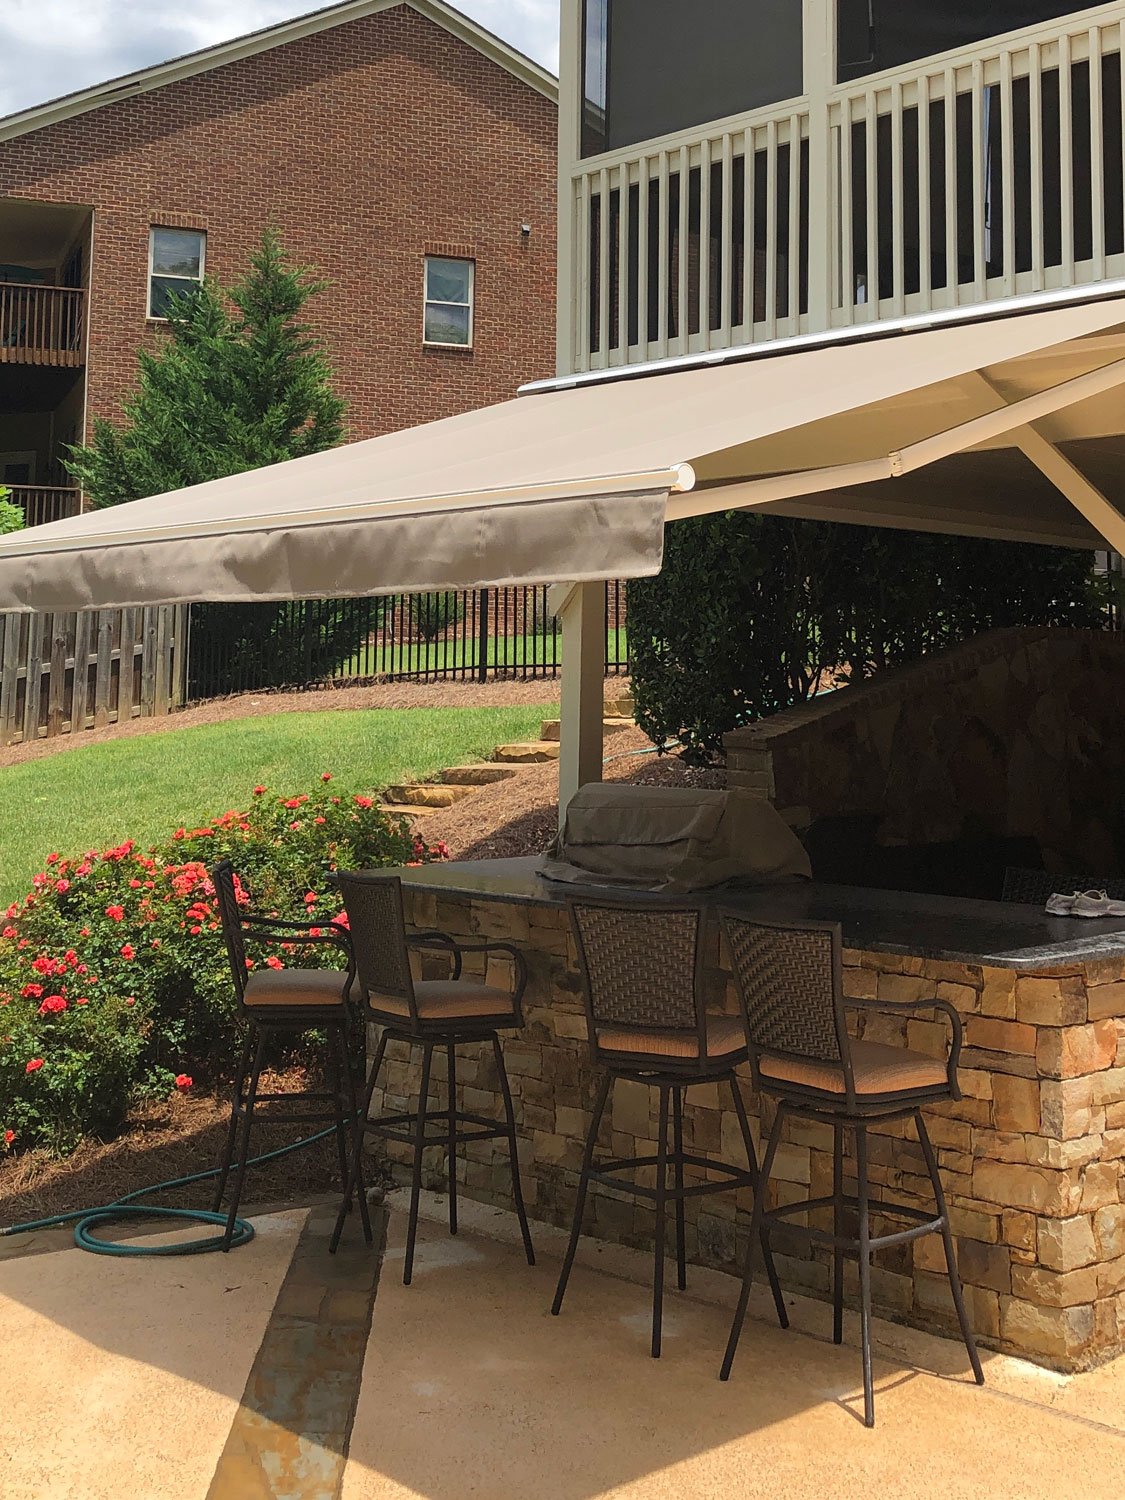 Patio Awning Over Outdoor KitchenHome